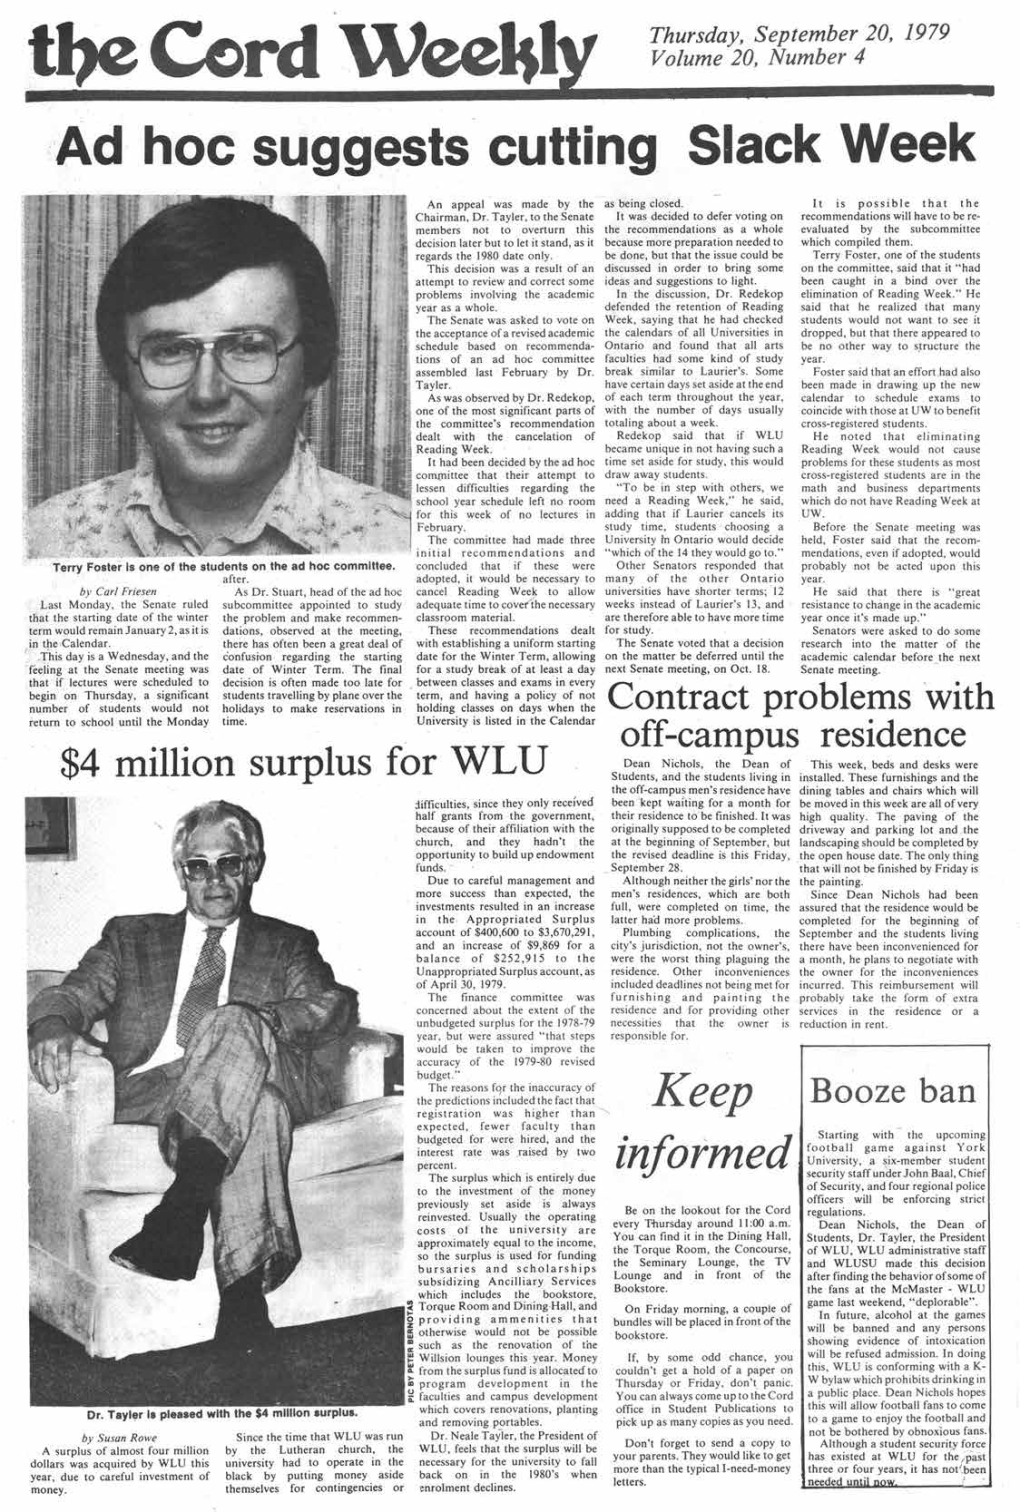 The Cord Weekly (September 27, 1979)